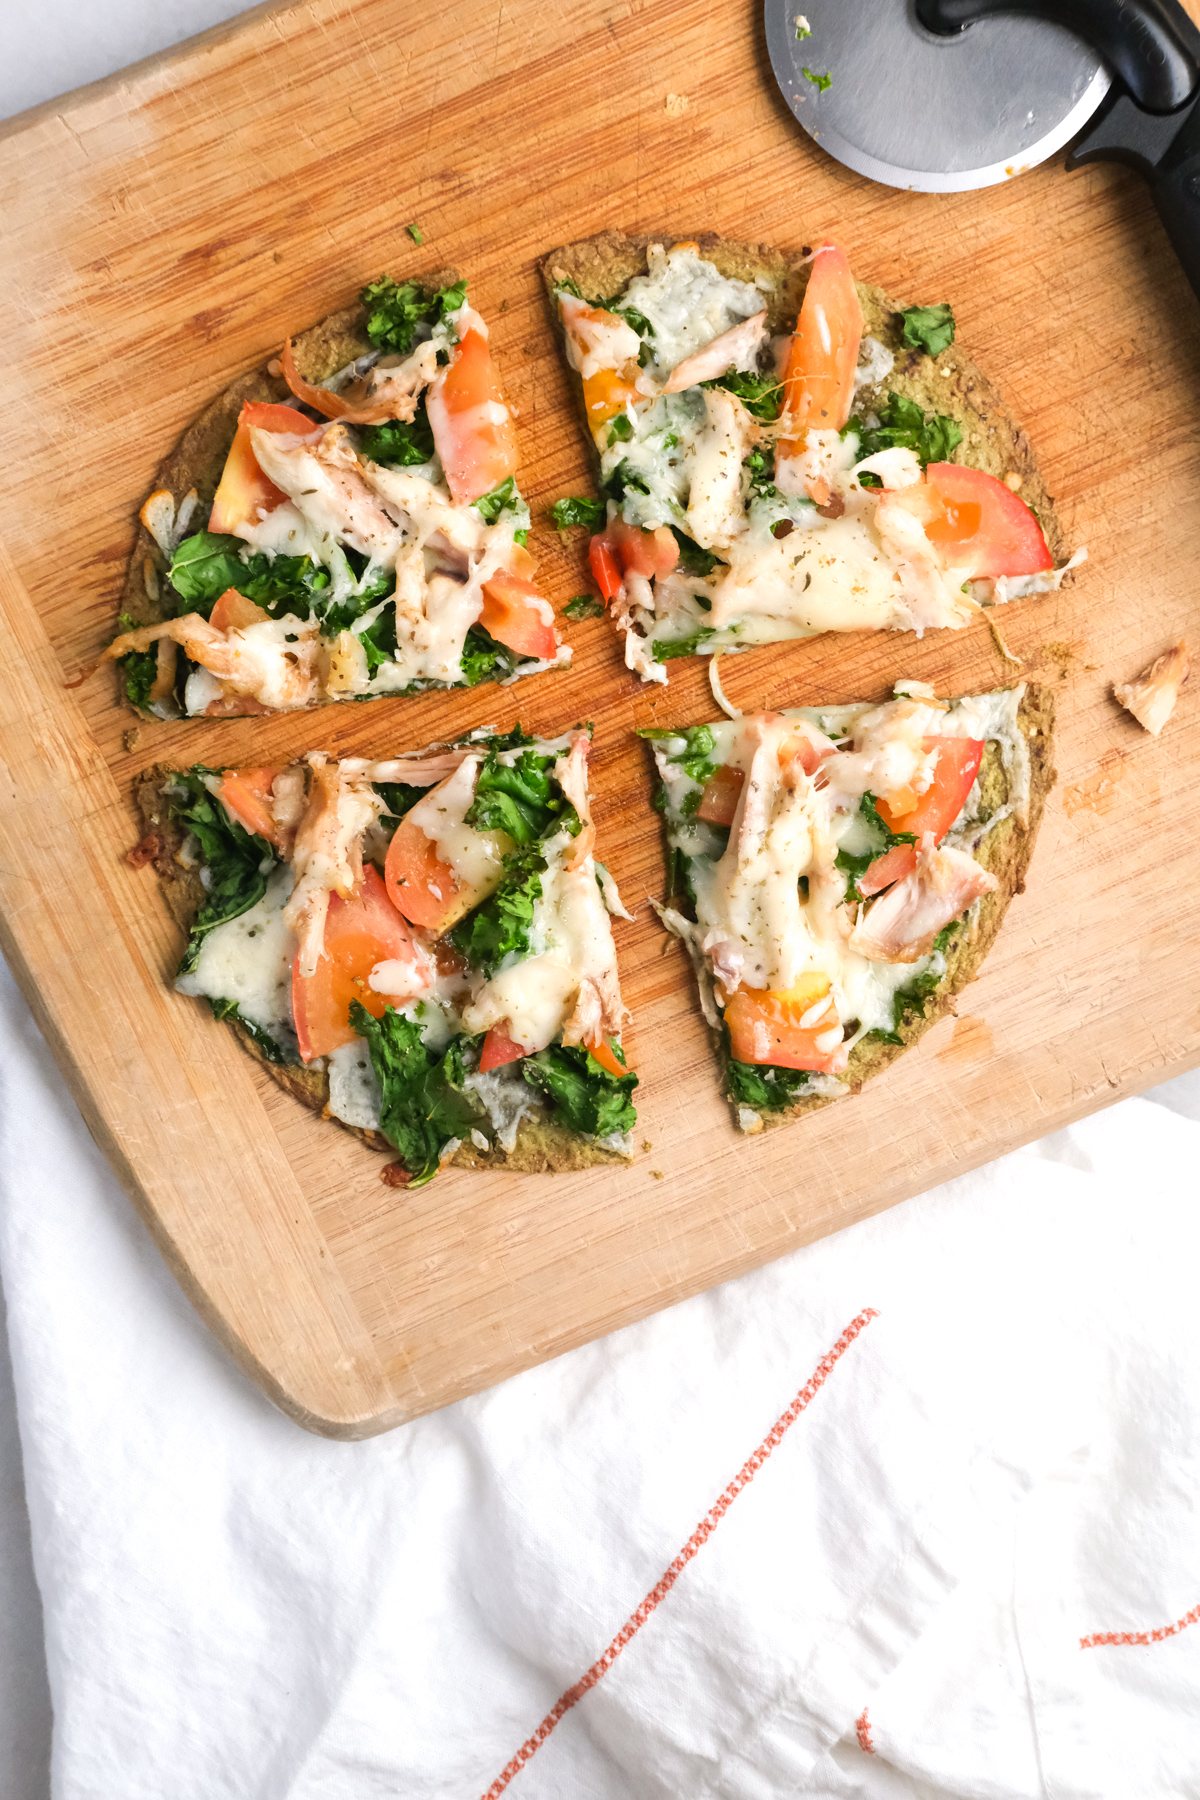 slices of a lunch chicken flatbread with vegetables